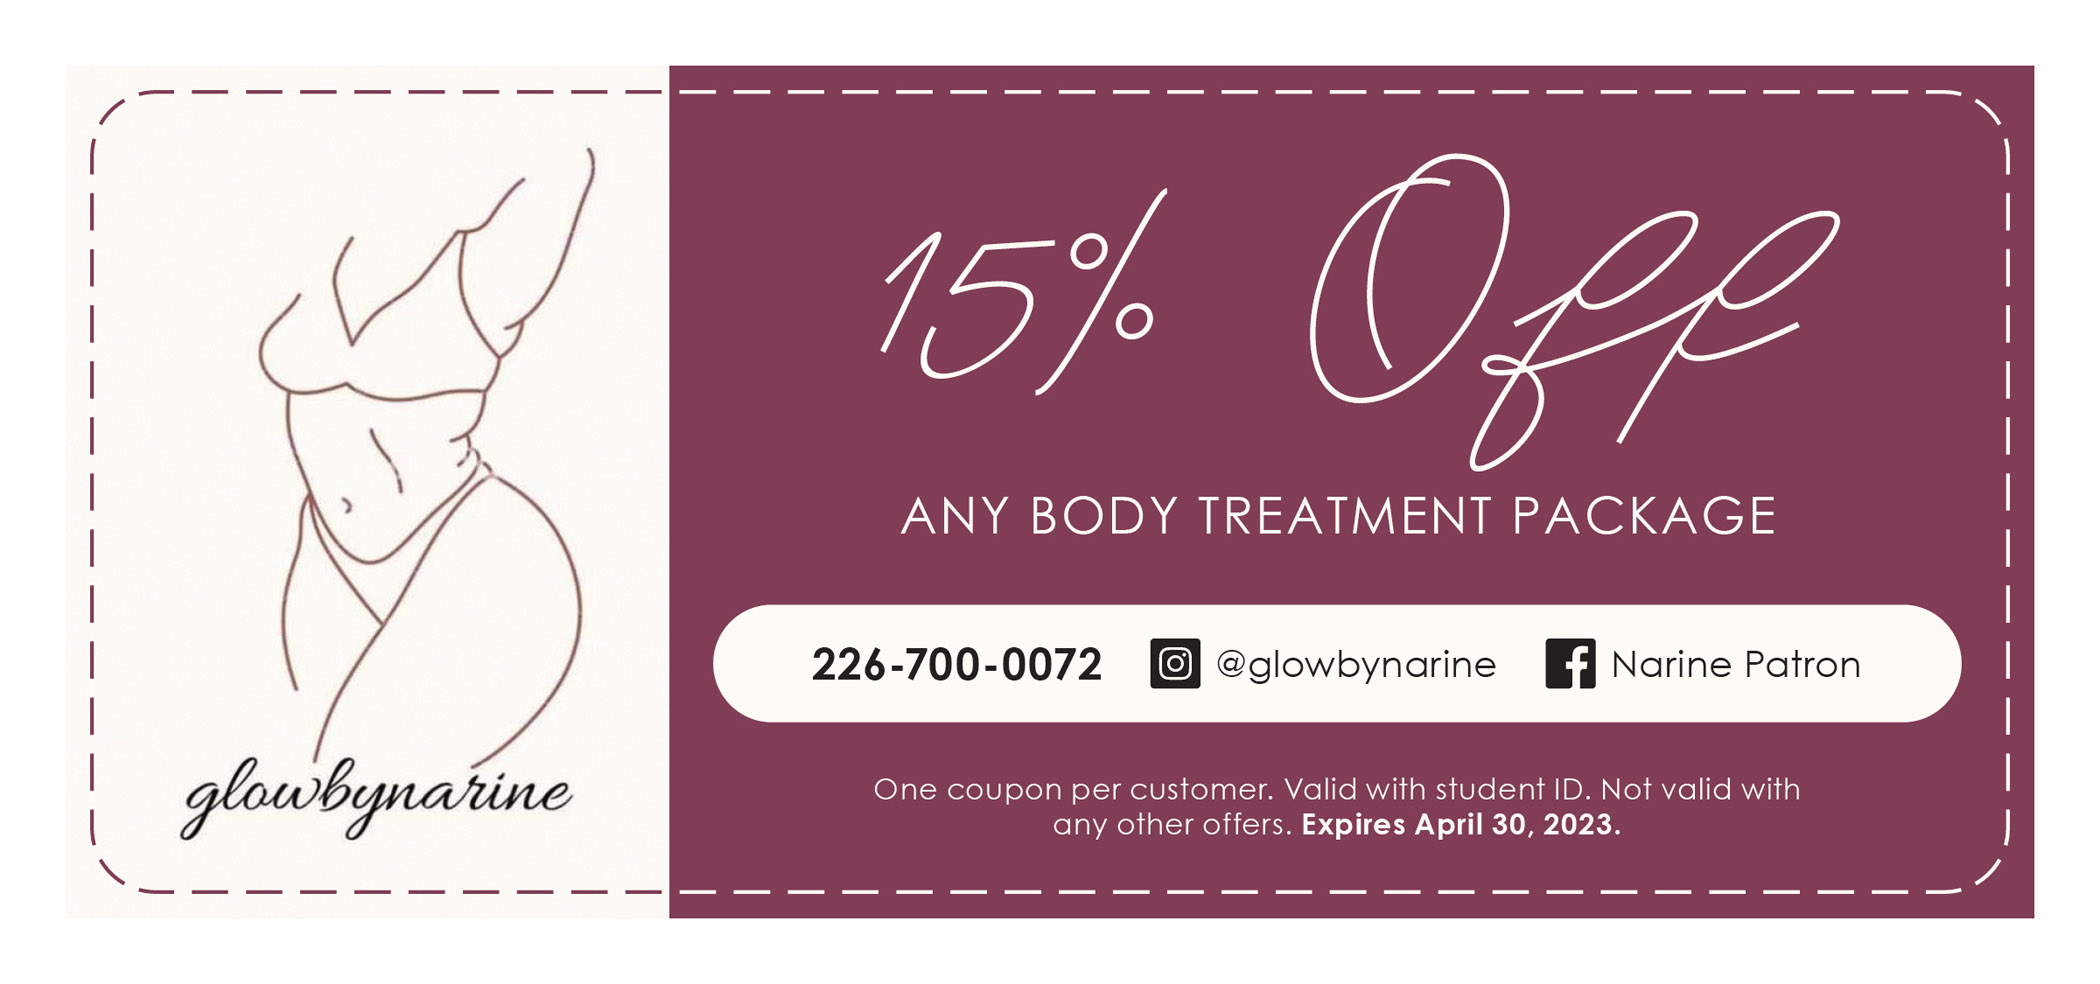 15% off any body treatment package